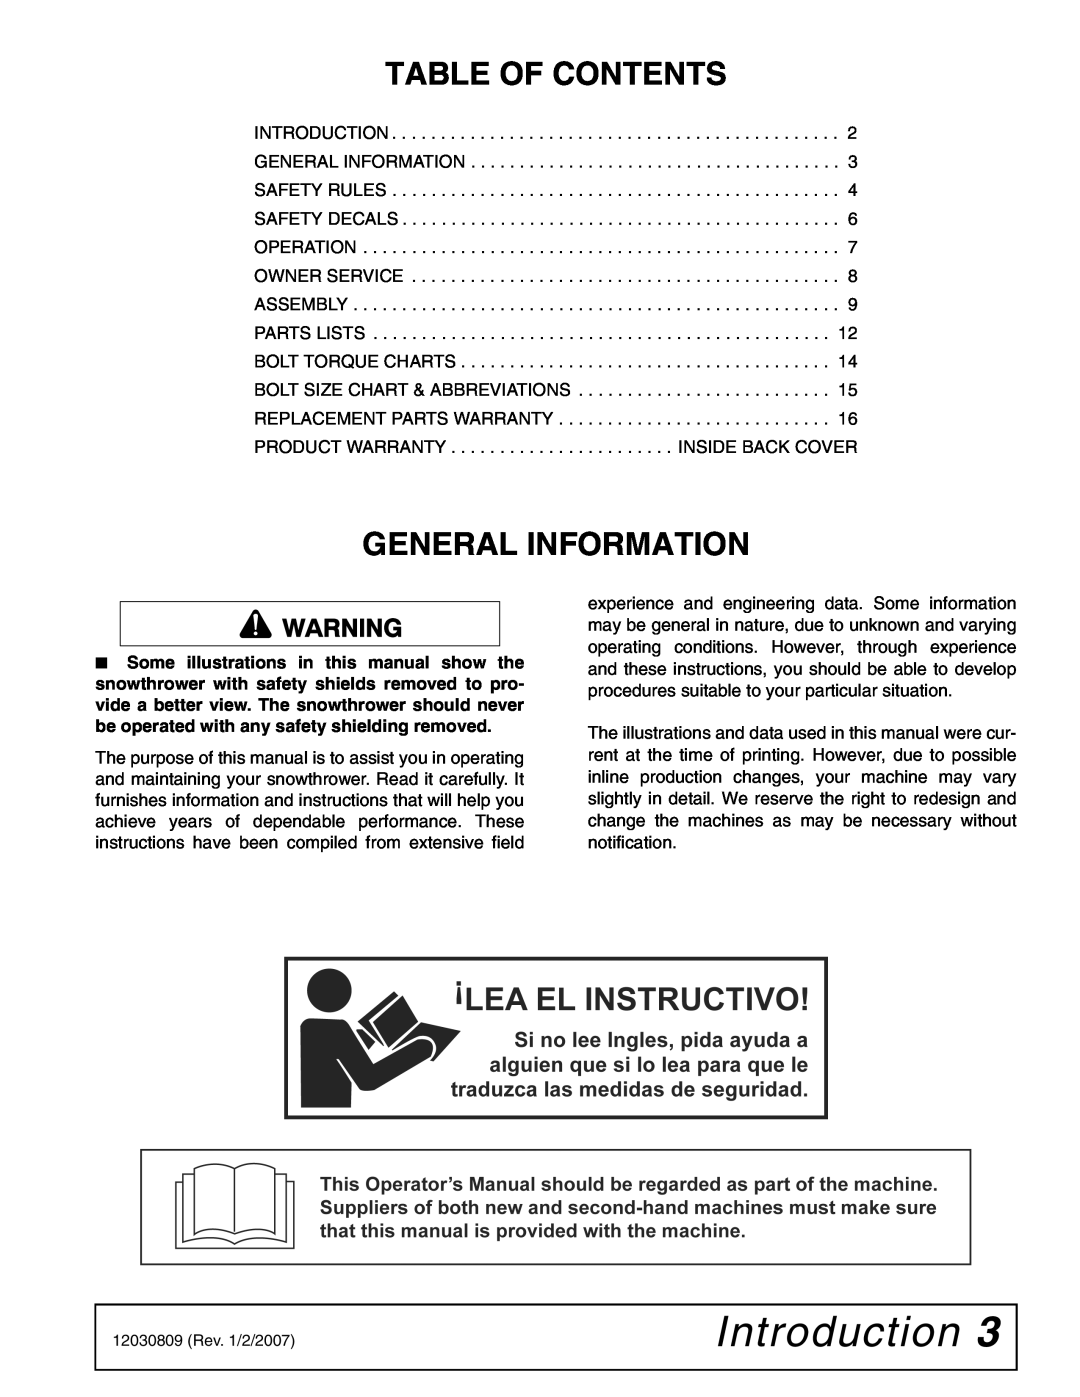 Woods Equipment ST500 manual Introduction, Table Of Contents, General Information 